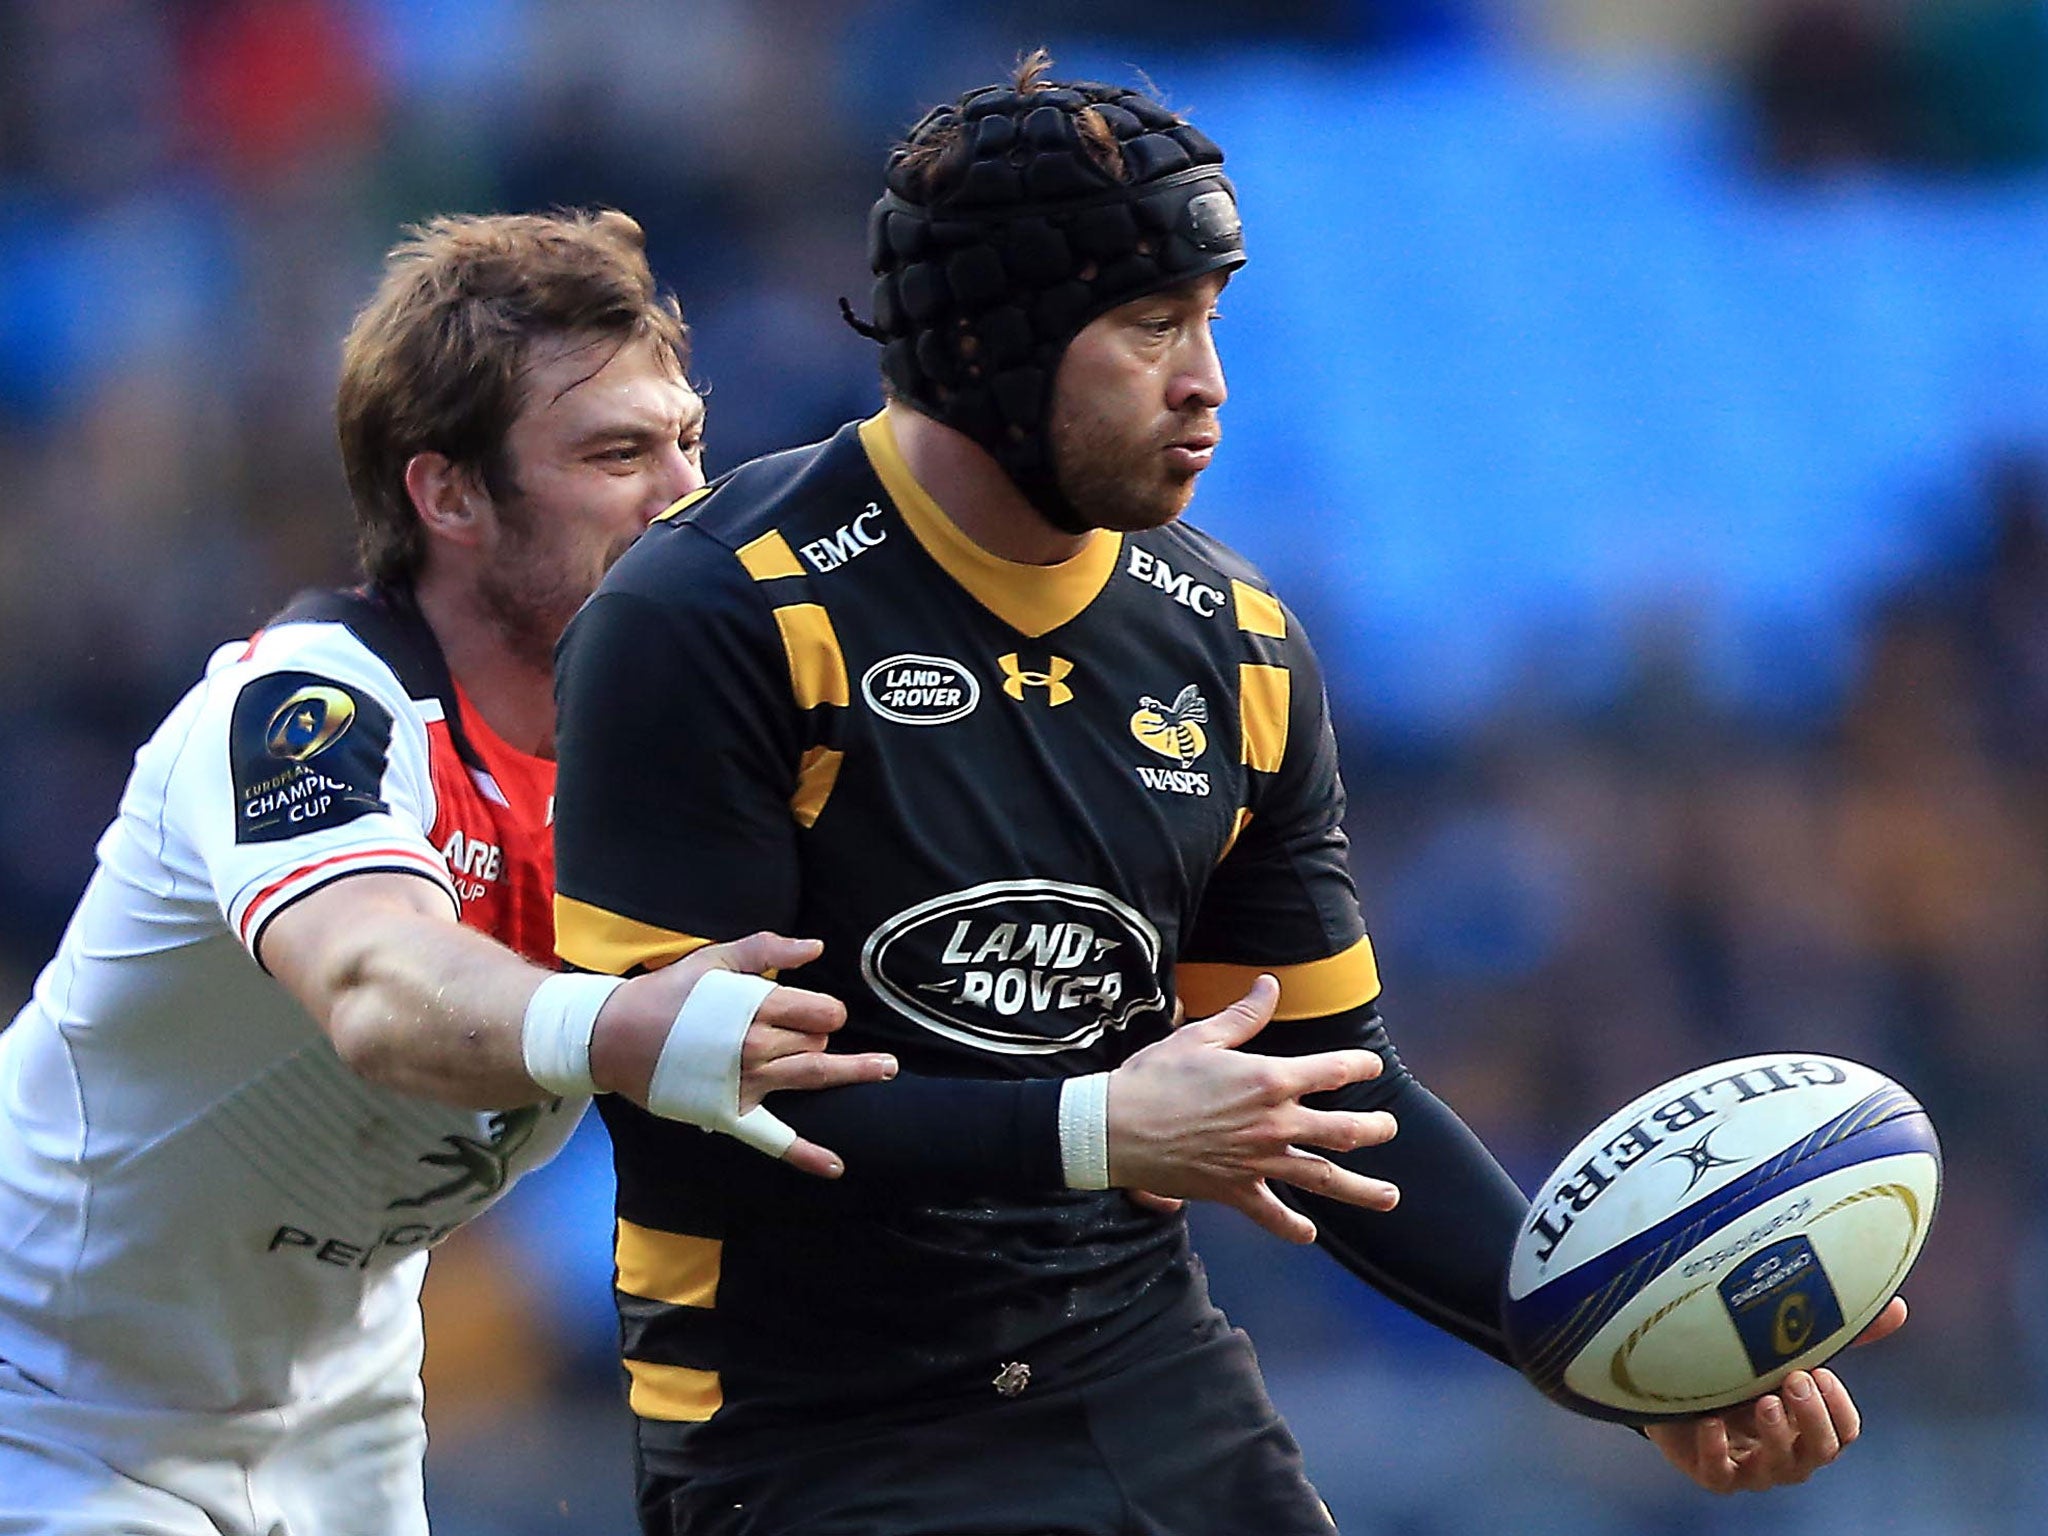 Danny Cipriani returns to Sale for the first time since leaving for Wasps last summer